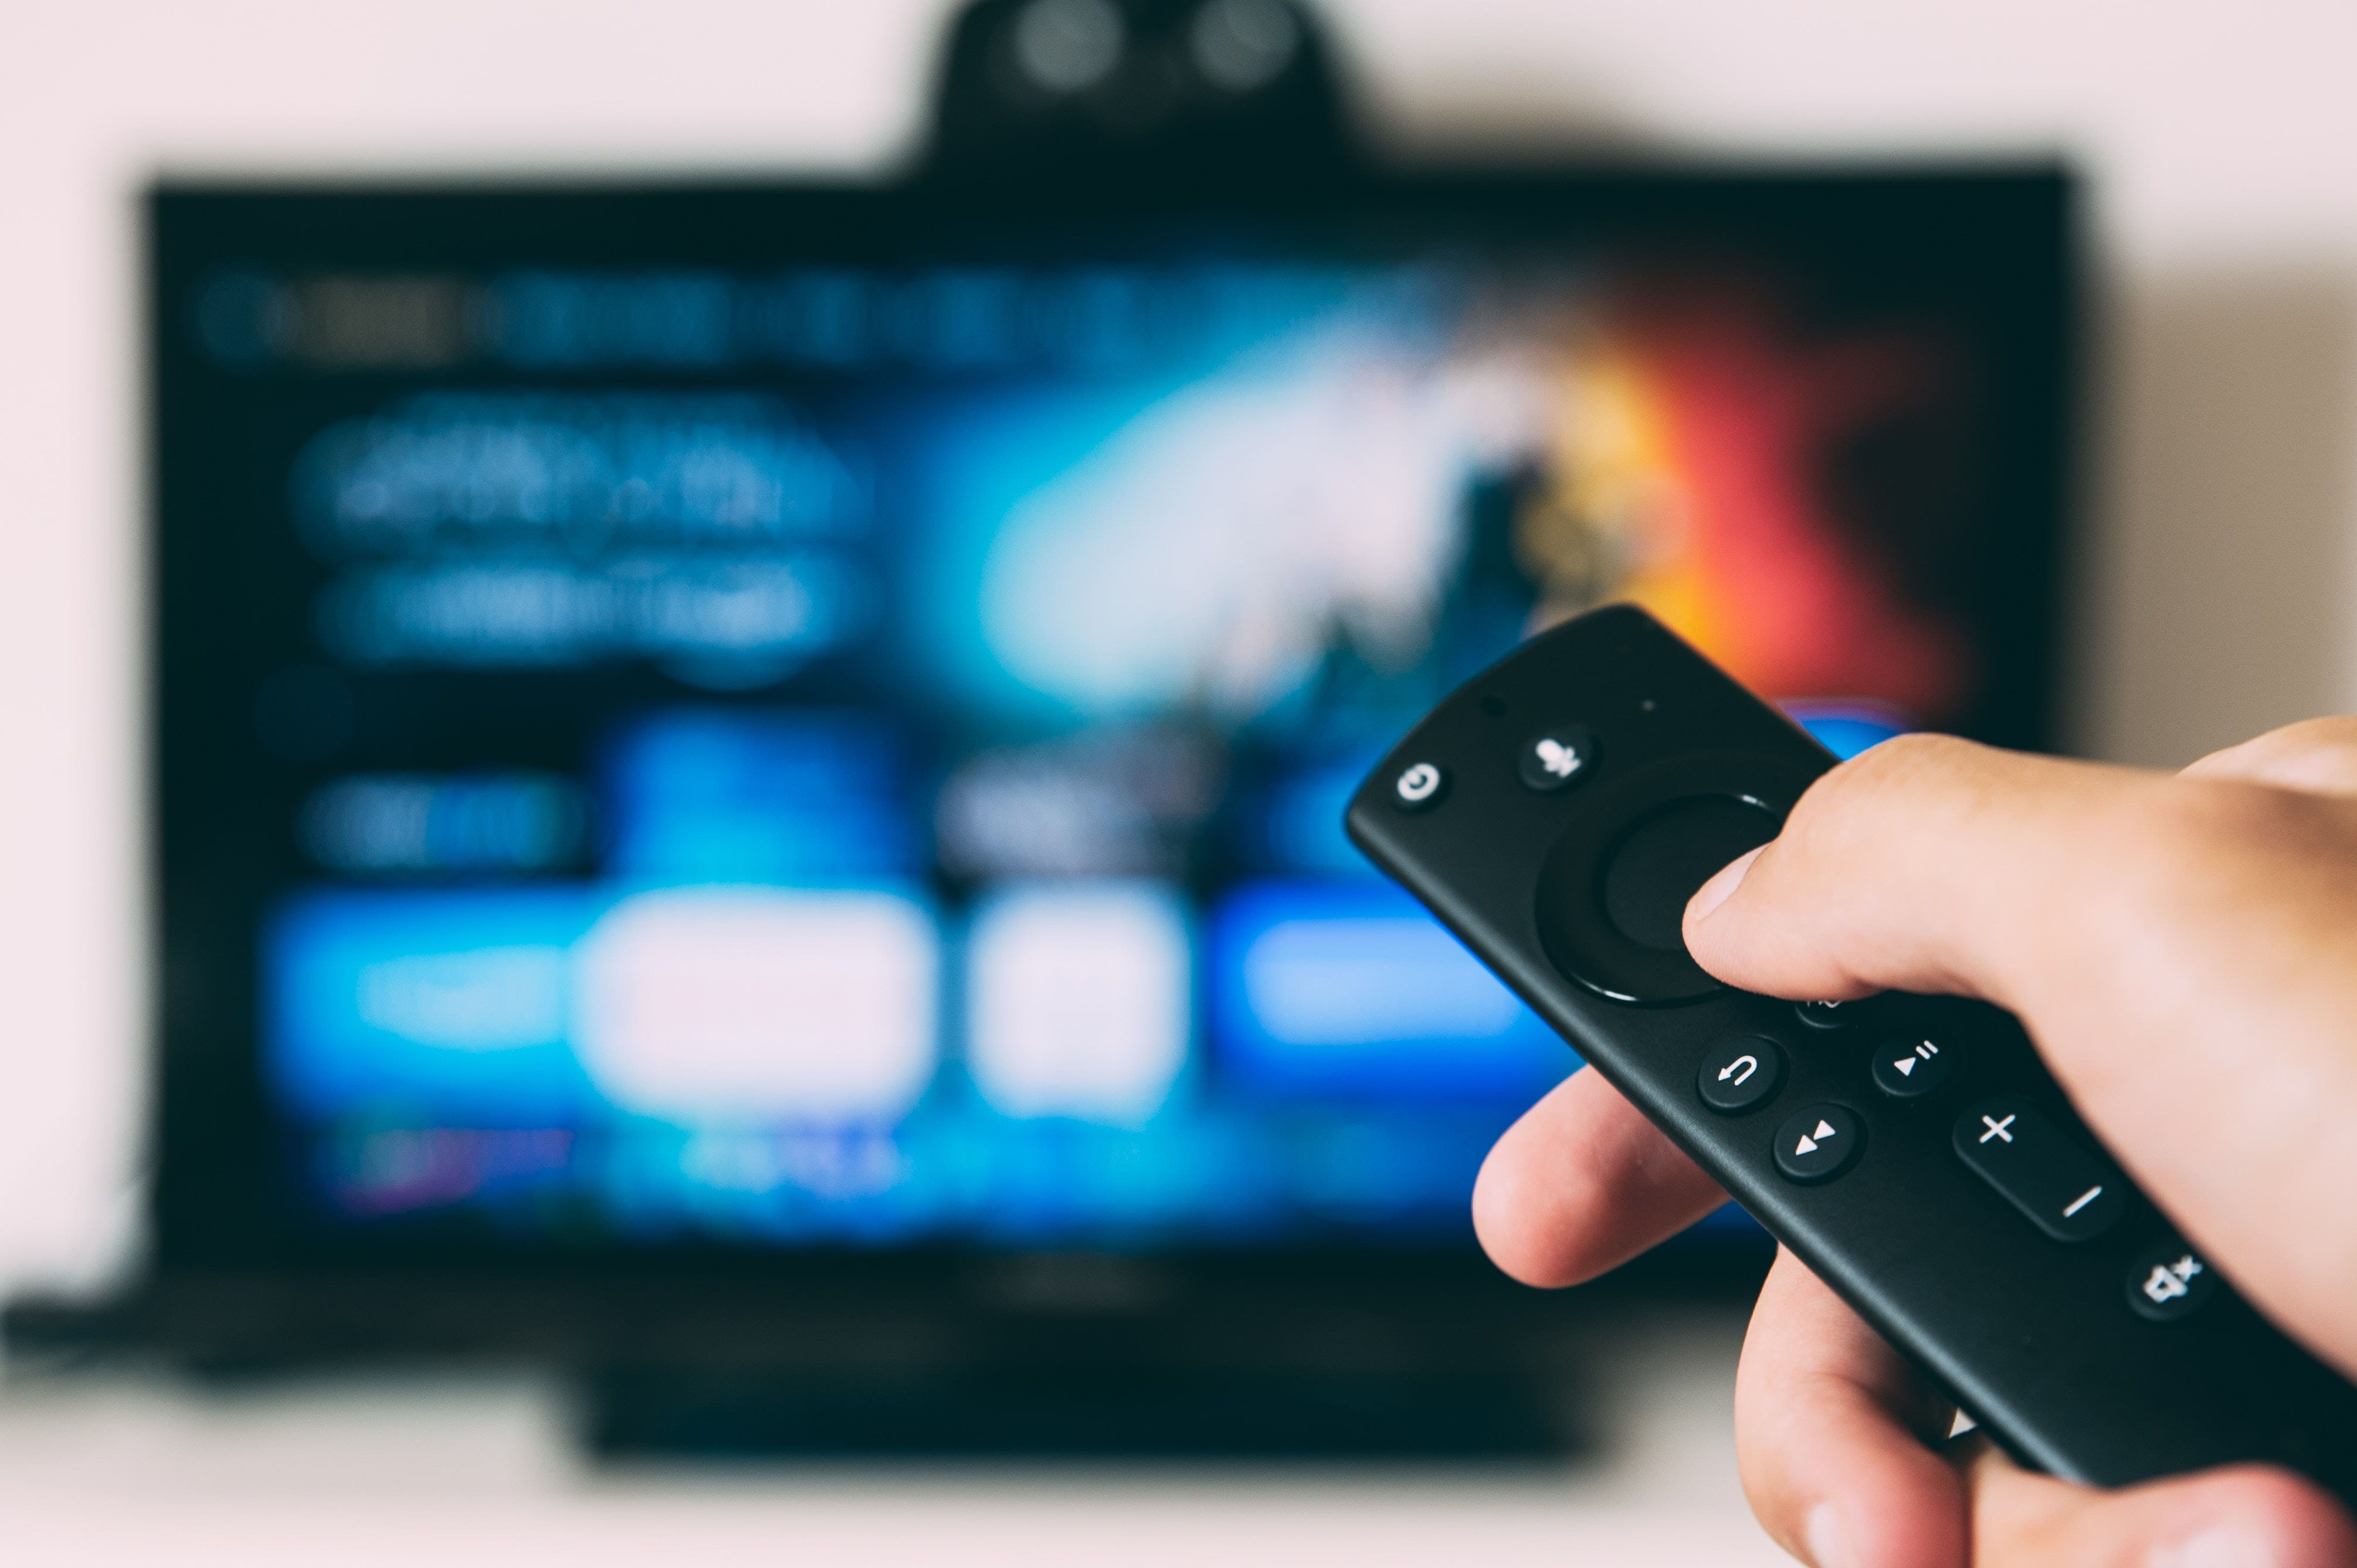 Benzinga Asks: Do You Pay For More Than 3 Streaming Services?